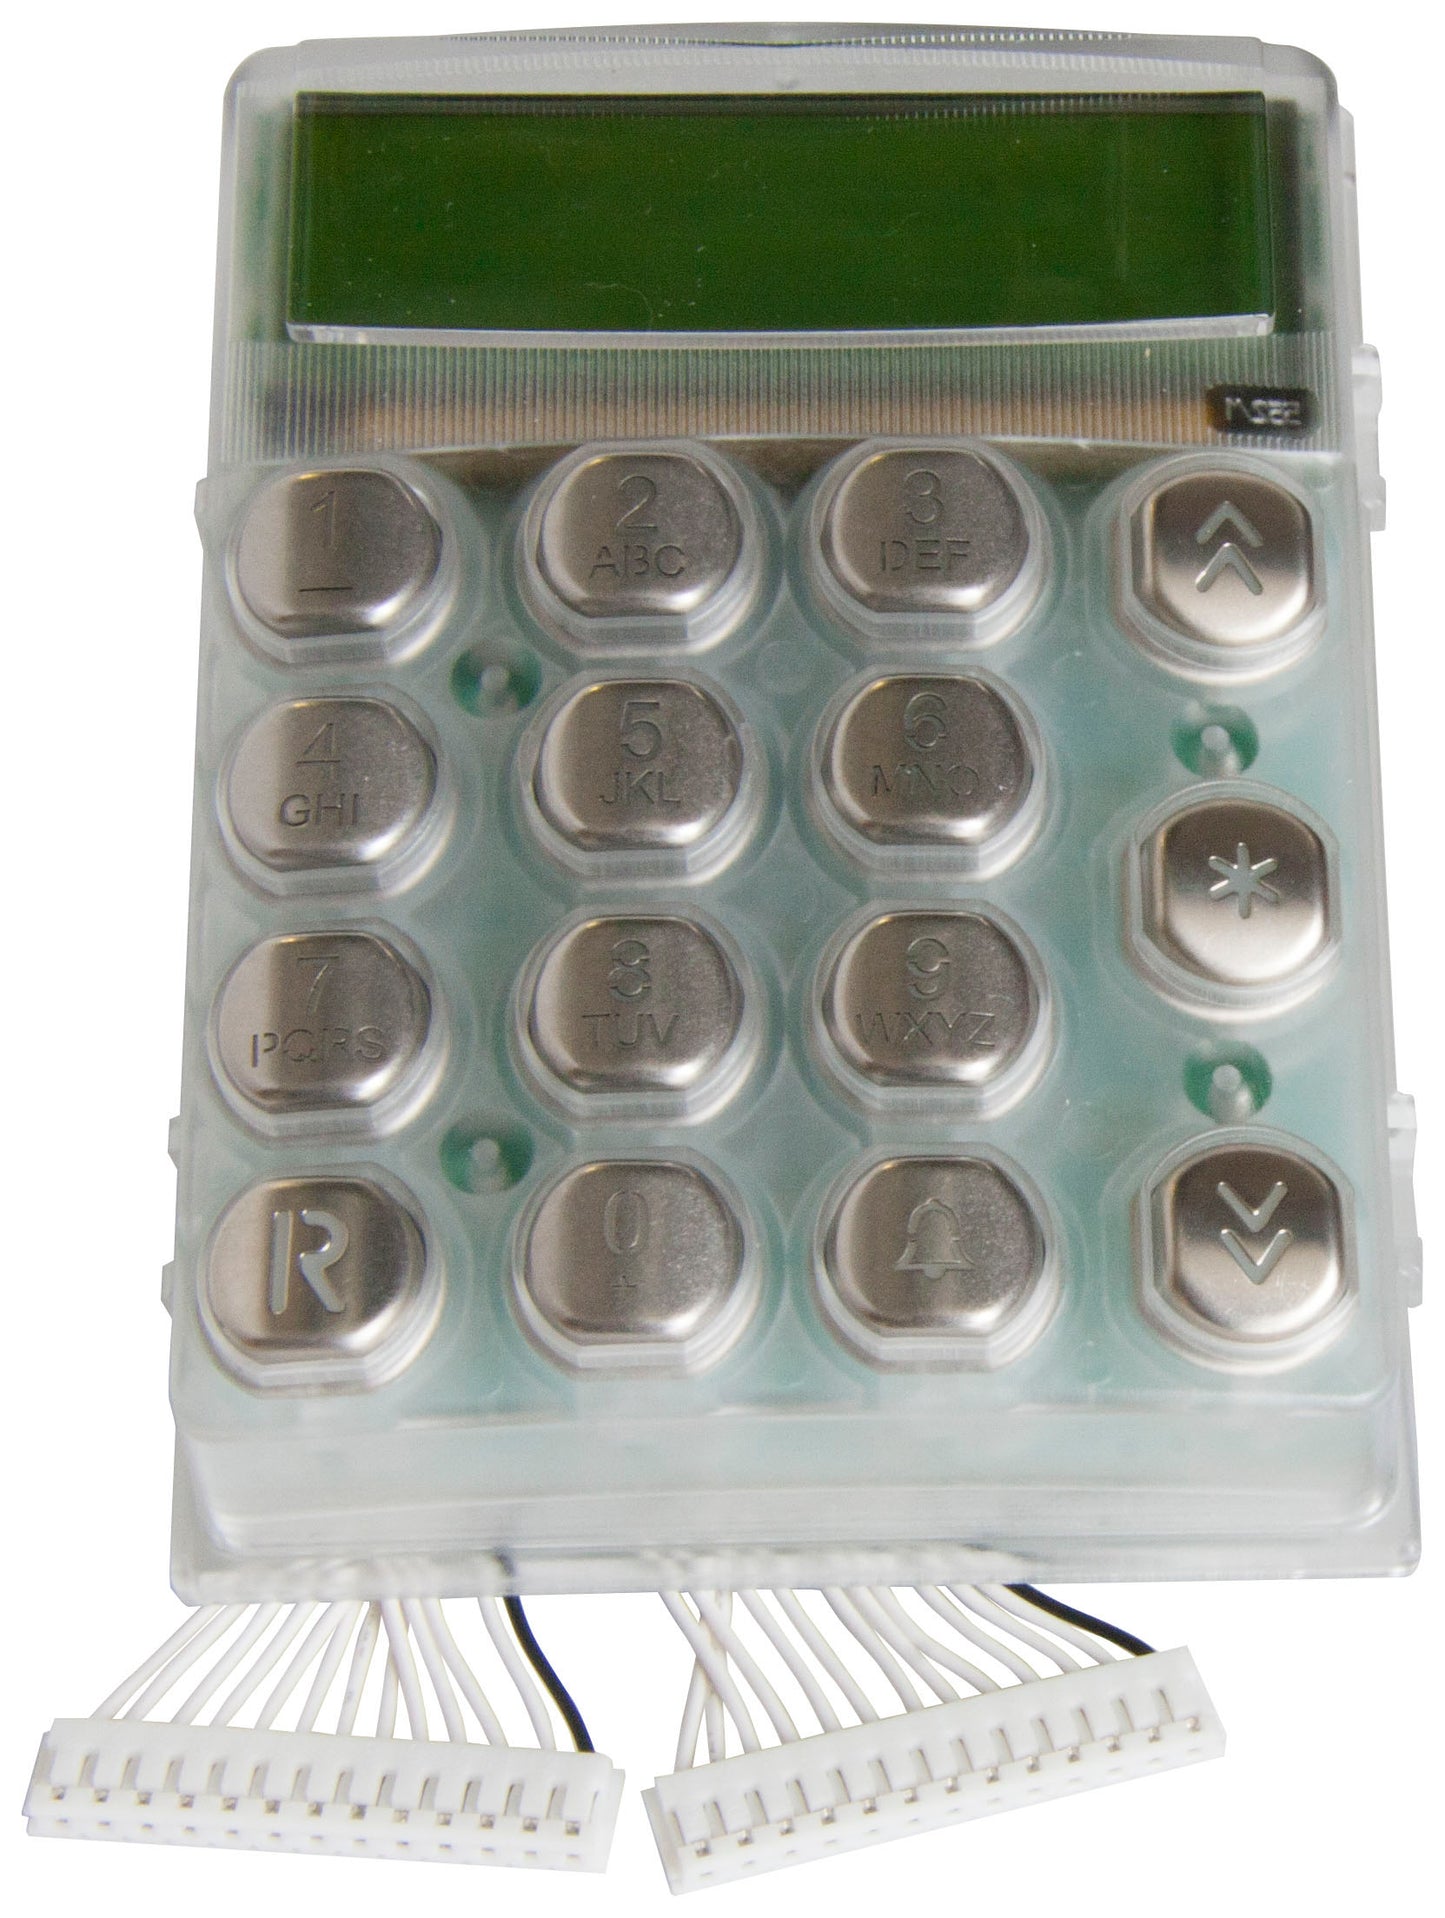 Keypad With Display For 12F412F7